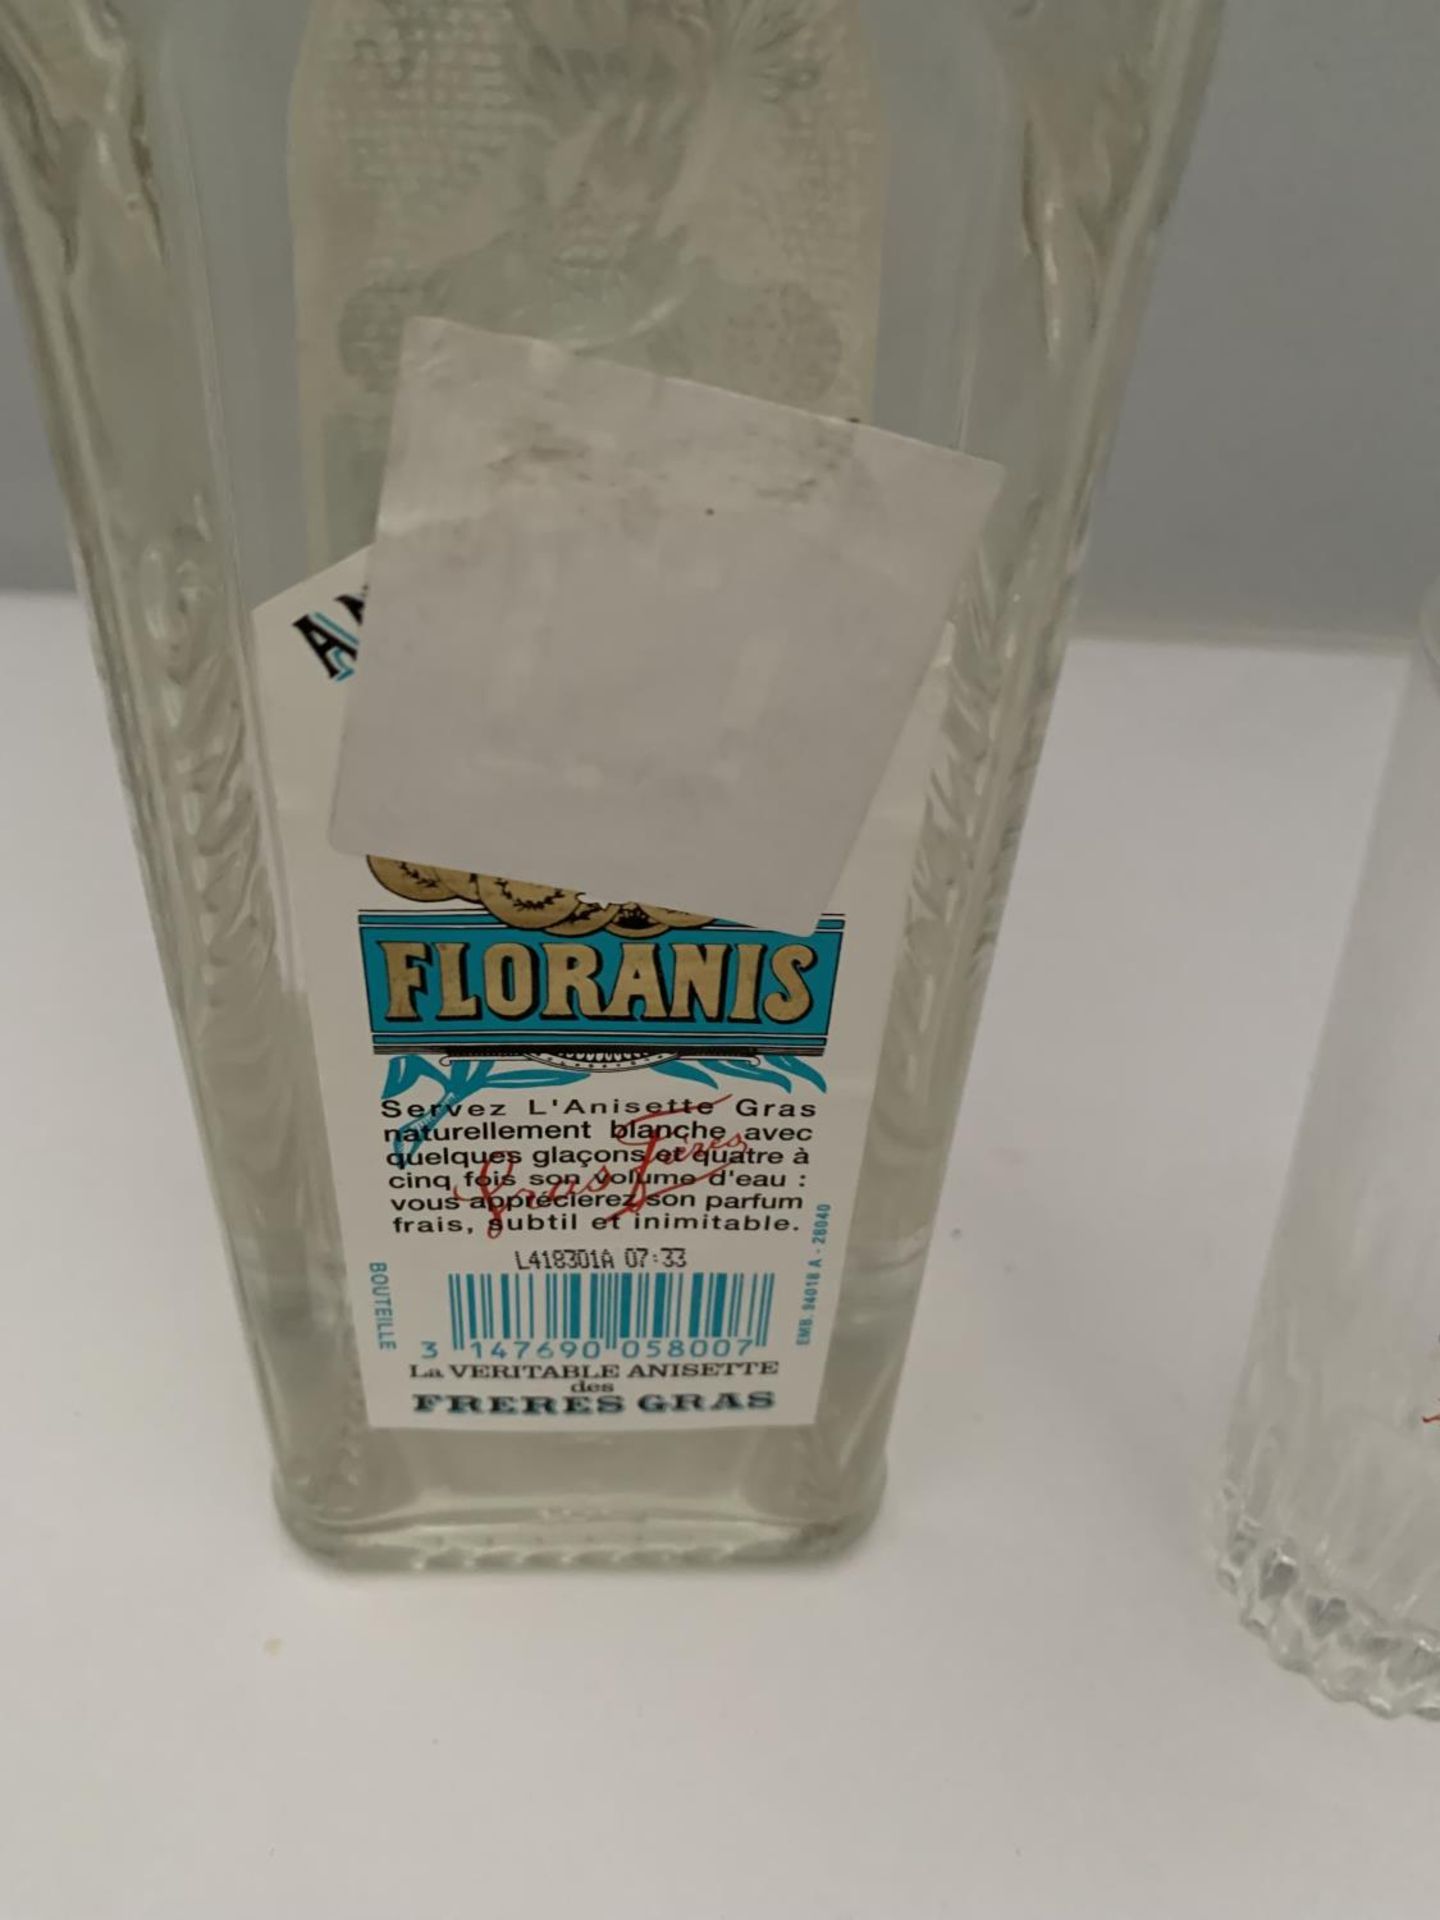 A LITRE BOTTLE OF ANISETTE GRAS 1872 FLORANIS EXPORT PERITIF ANISE 45% VOL WITH AN ANIS GRAS GLASS - Image 4 of 4